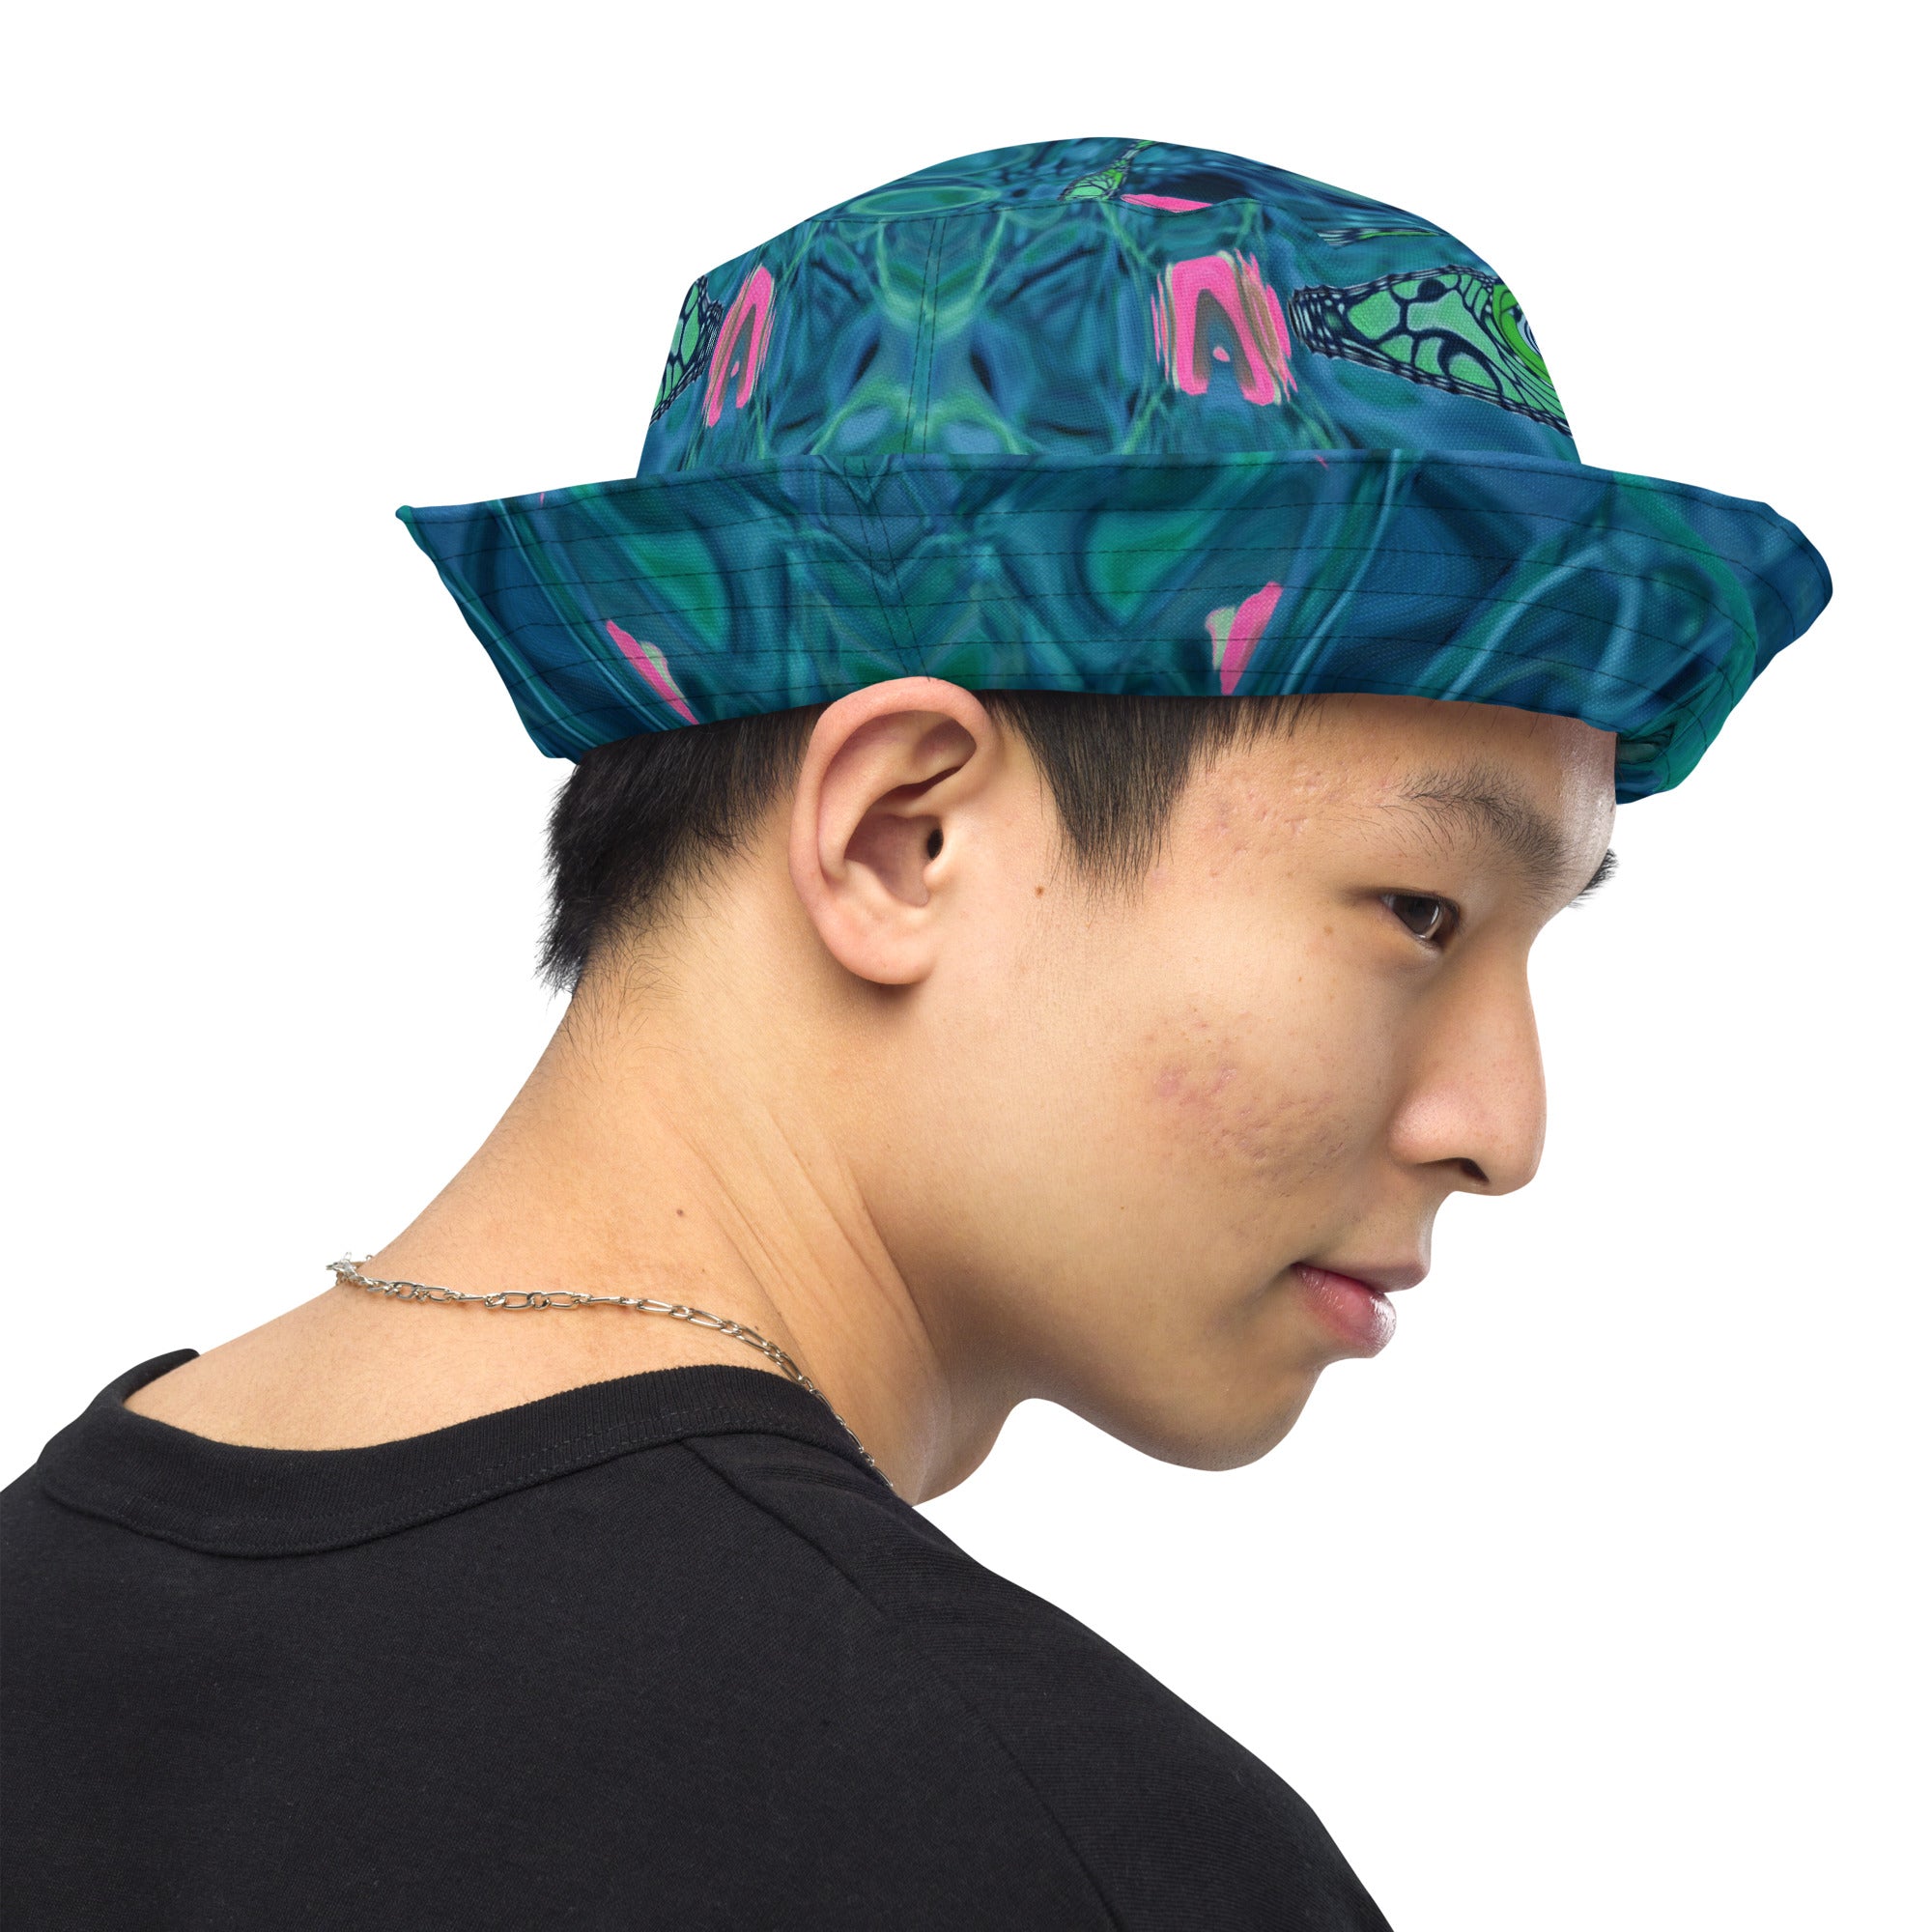 Reversible Bucket Hat | Cosmic Abstract Teal and Green Retro Ripples